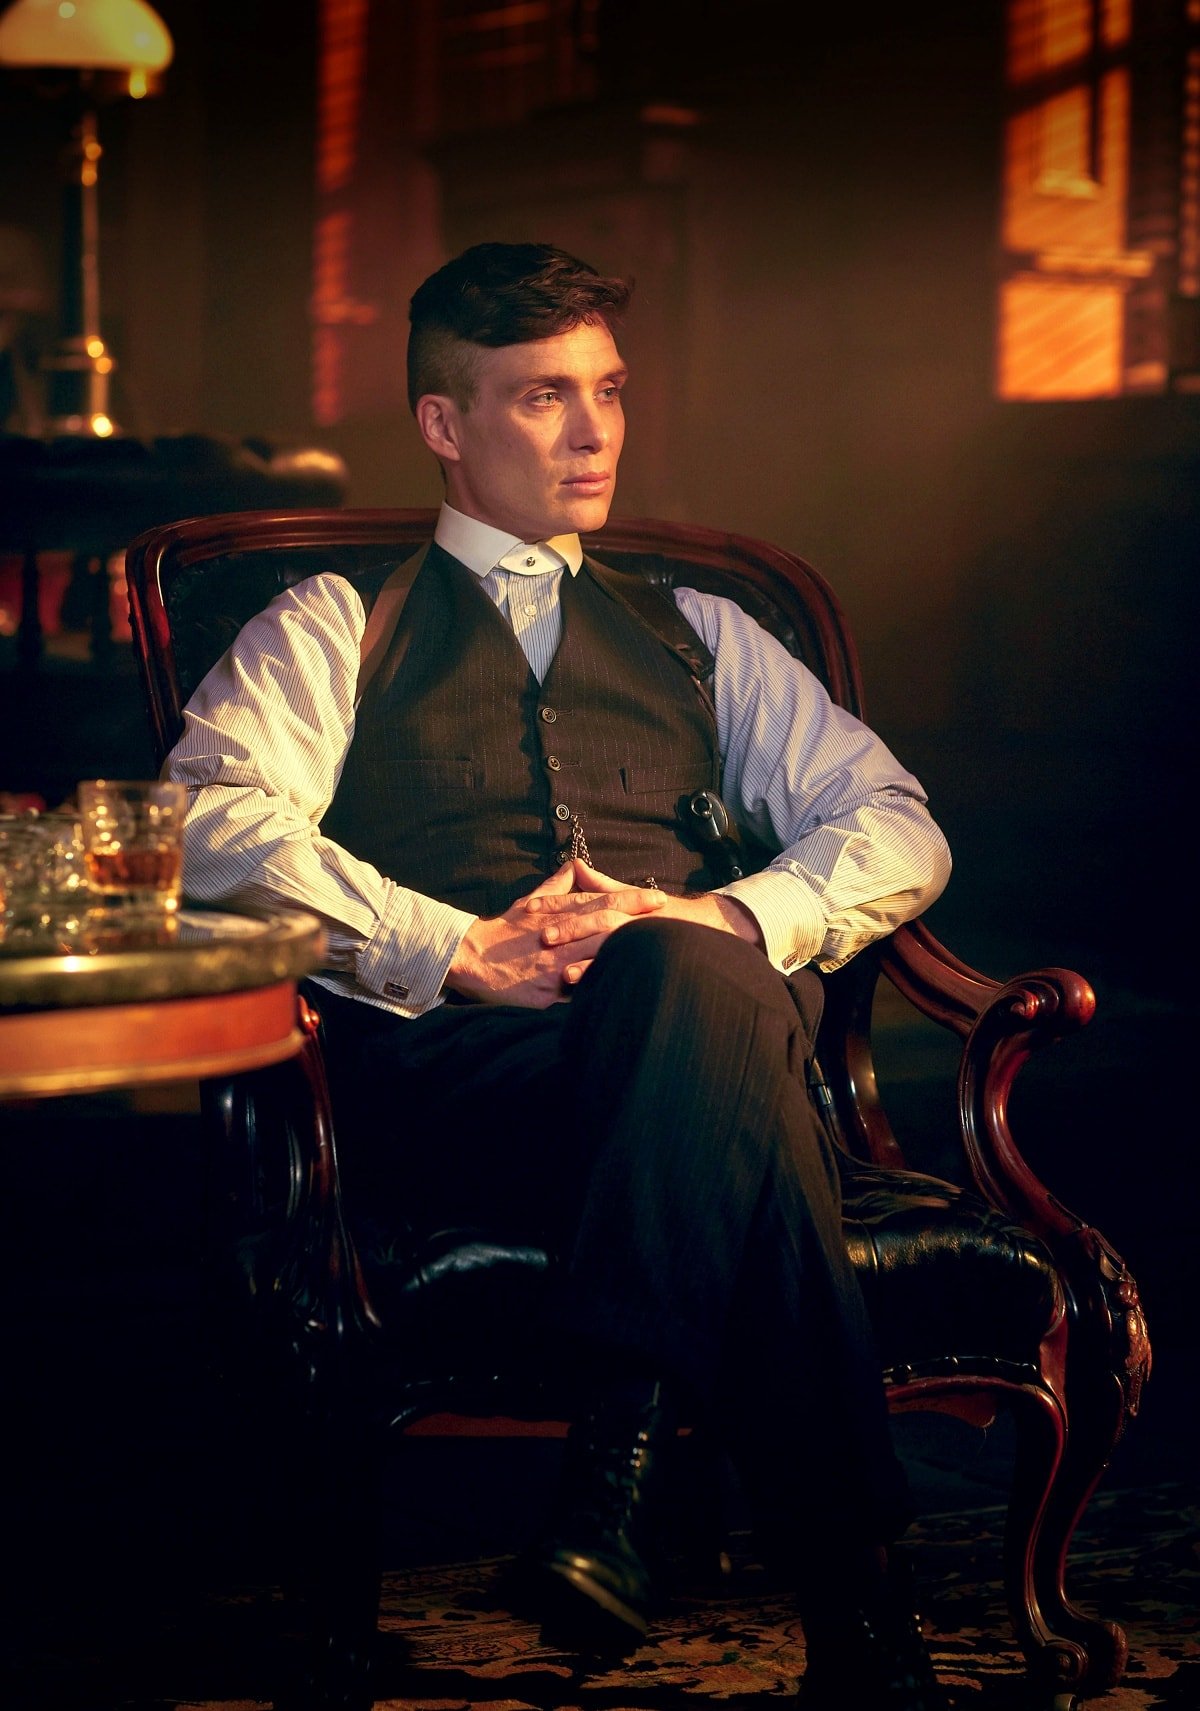 Promotional shot for Peaky Blinders featuring Cillian Murphy as Thomas Shelby